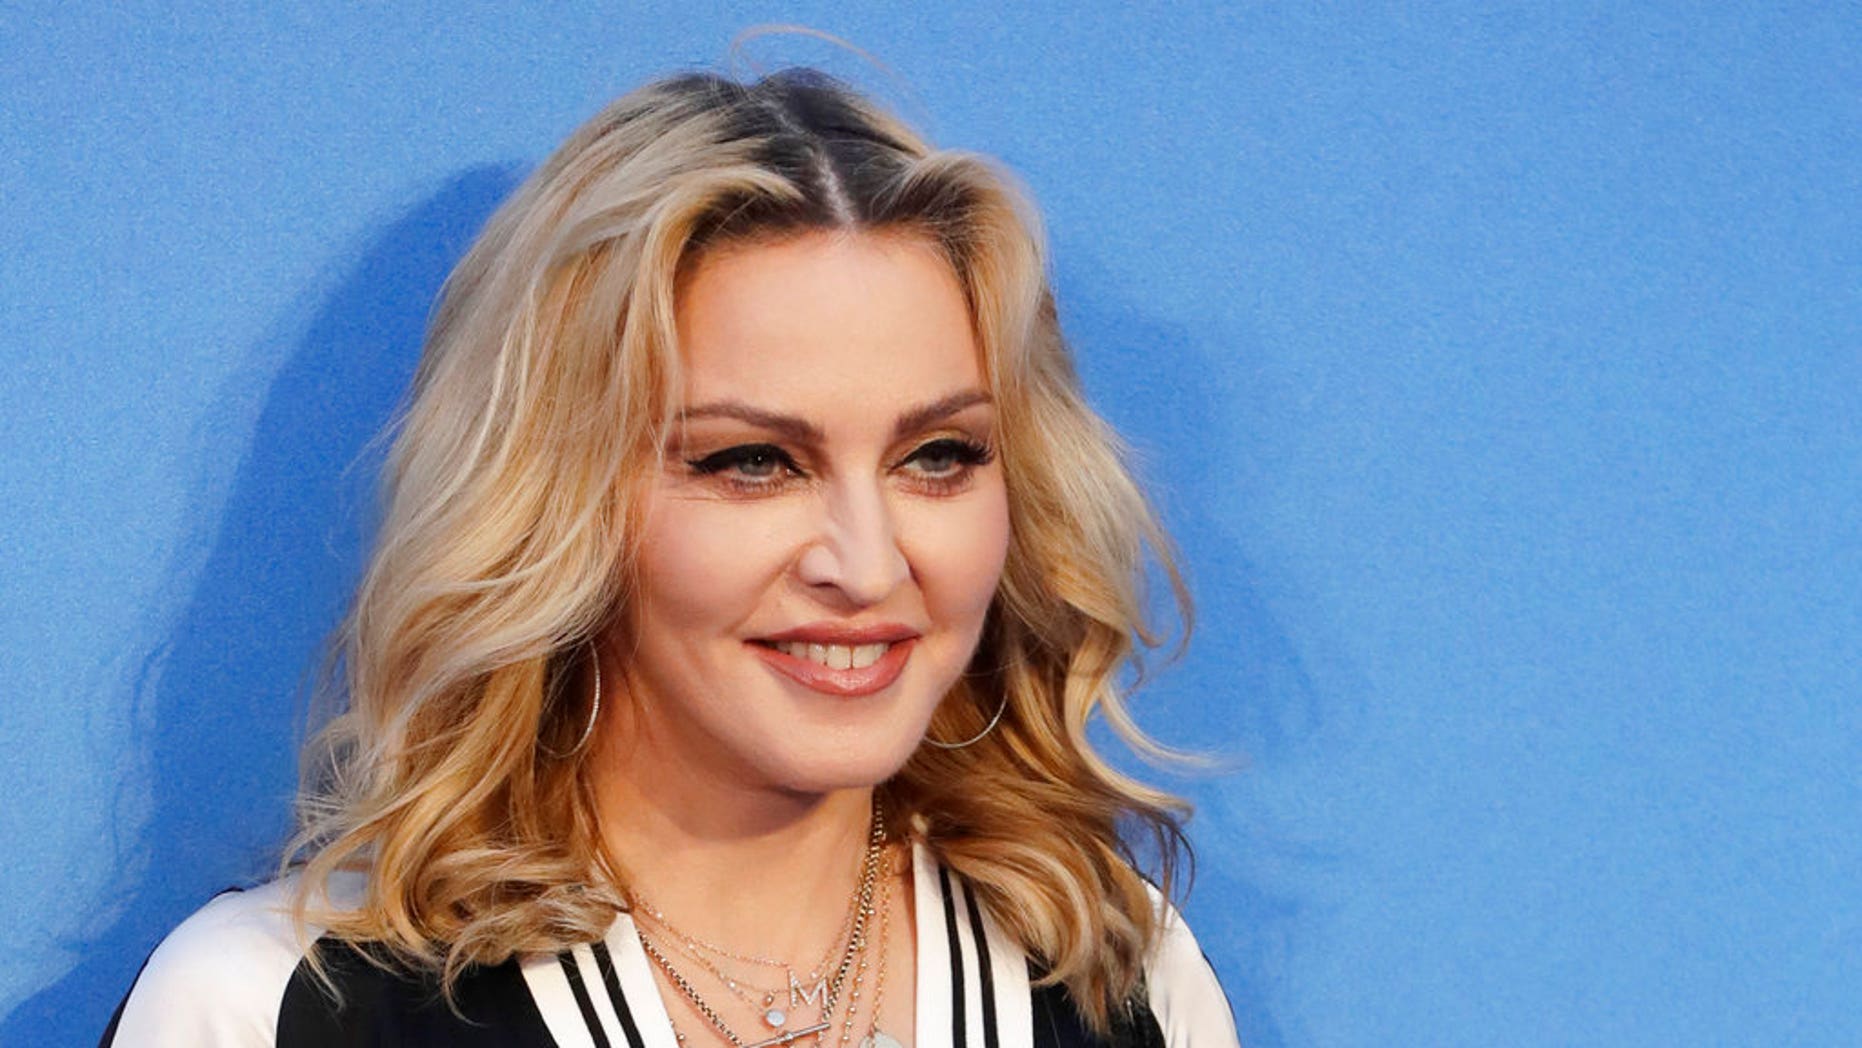 Madonna moves to Portugal 'I feel very creative and alive here' Fox News